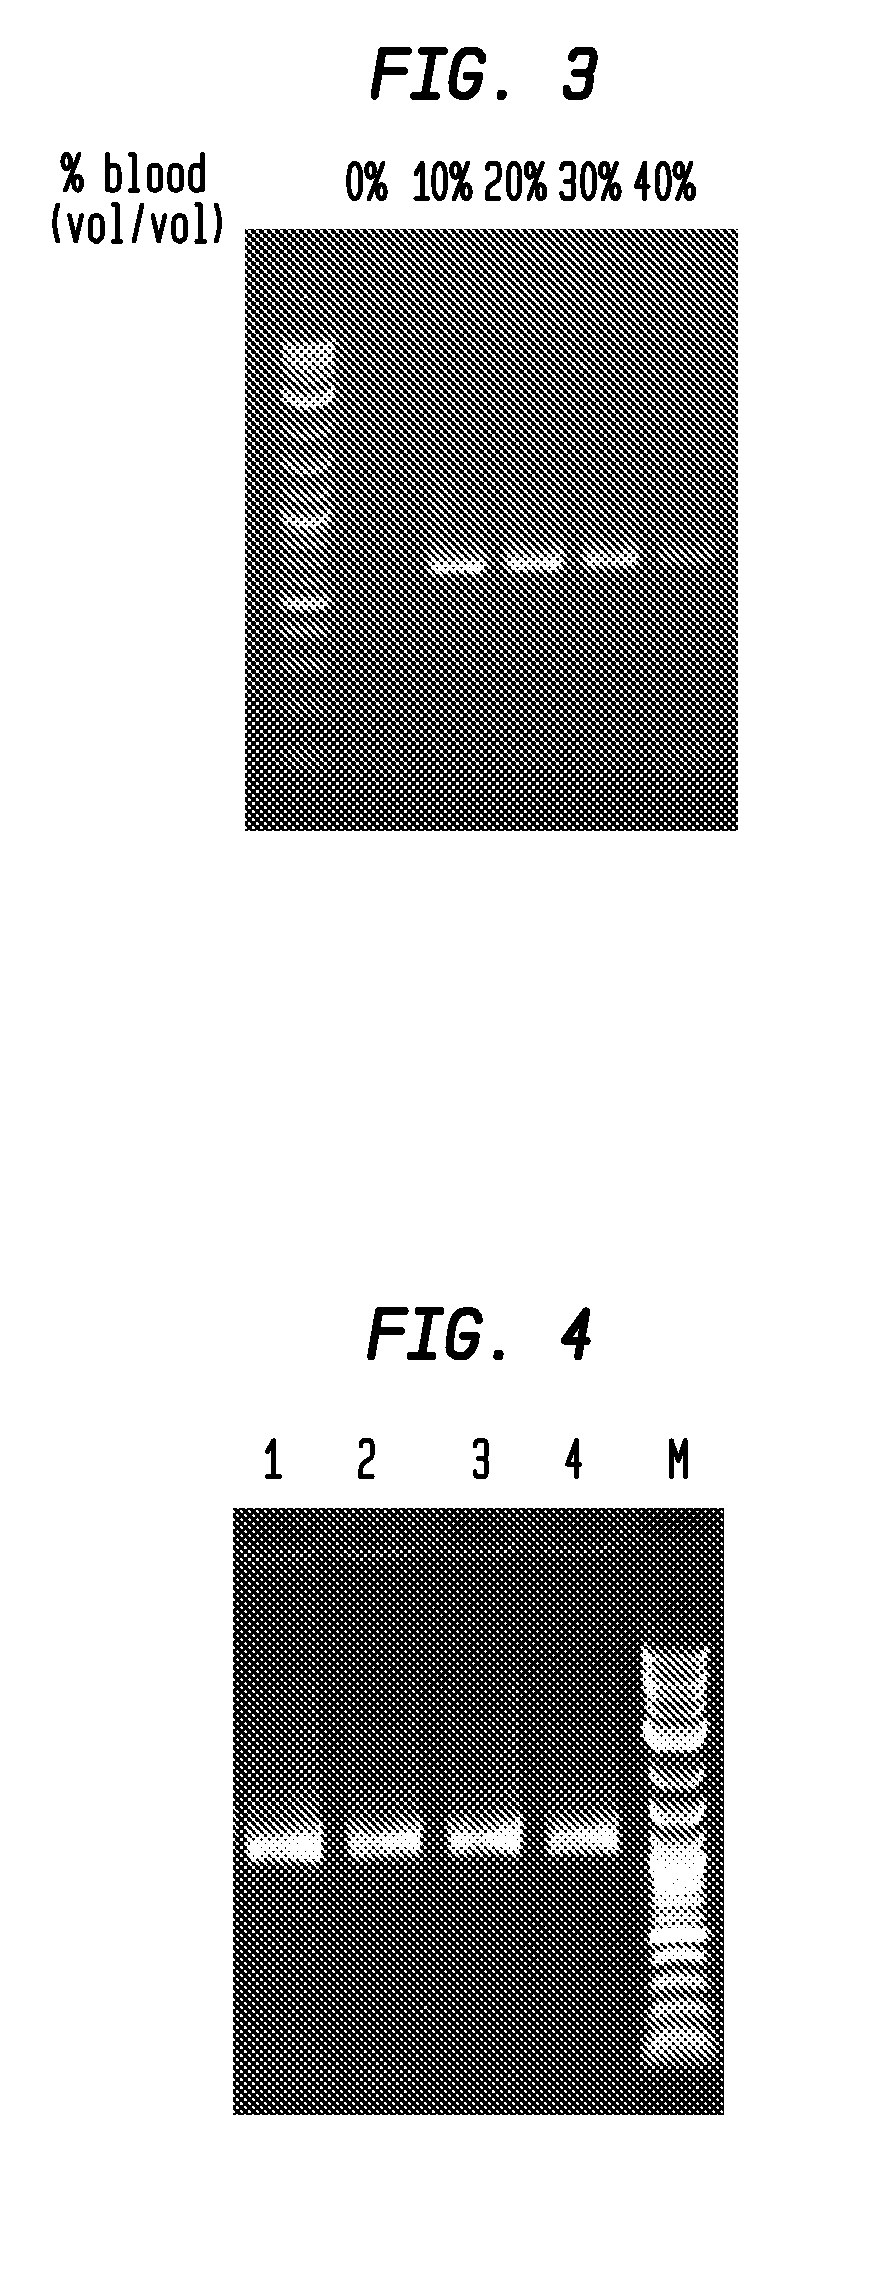 Enzyme Reagents for Amplification of Polynucleotides in the Presence of Inhibitors